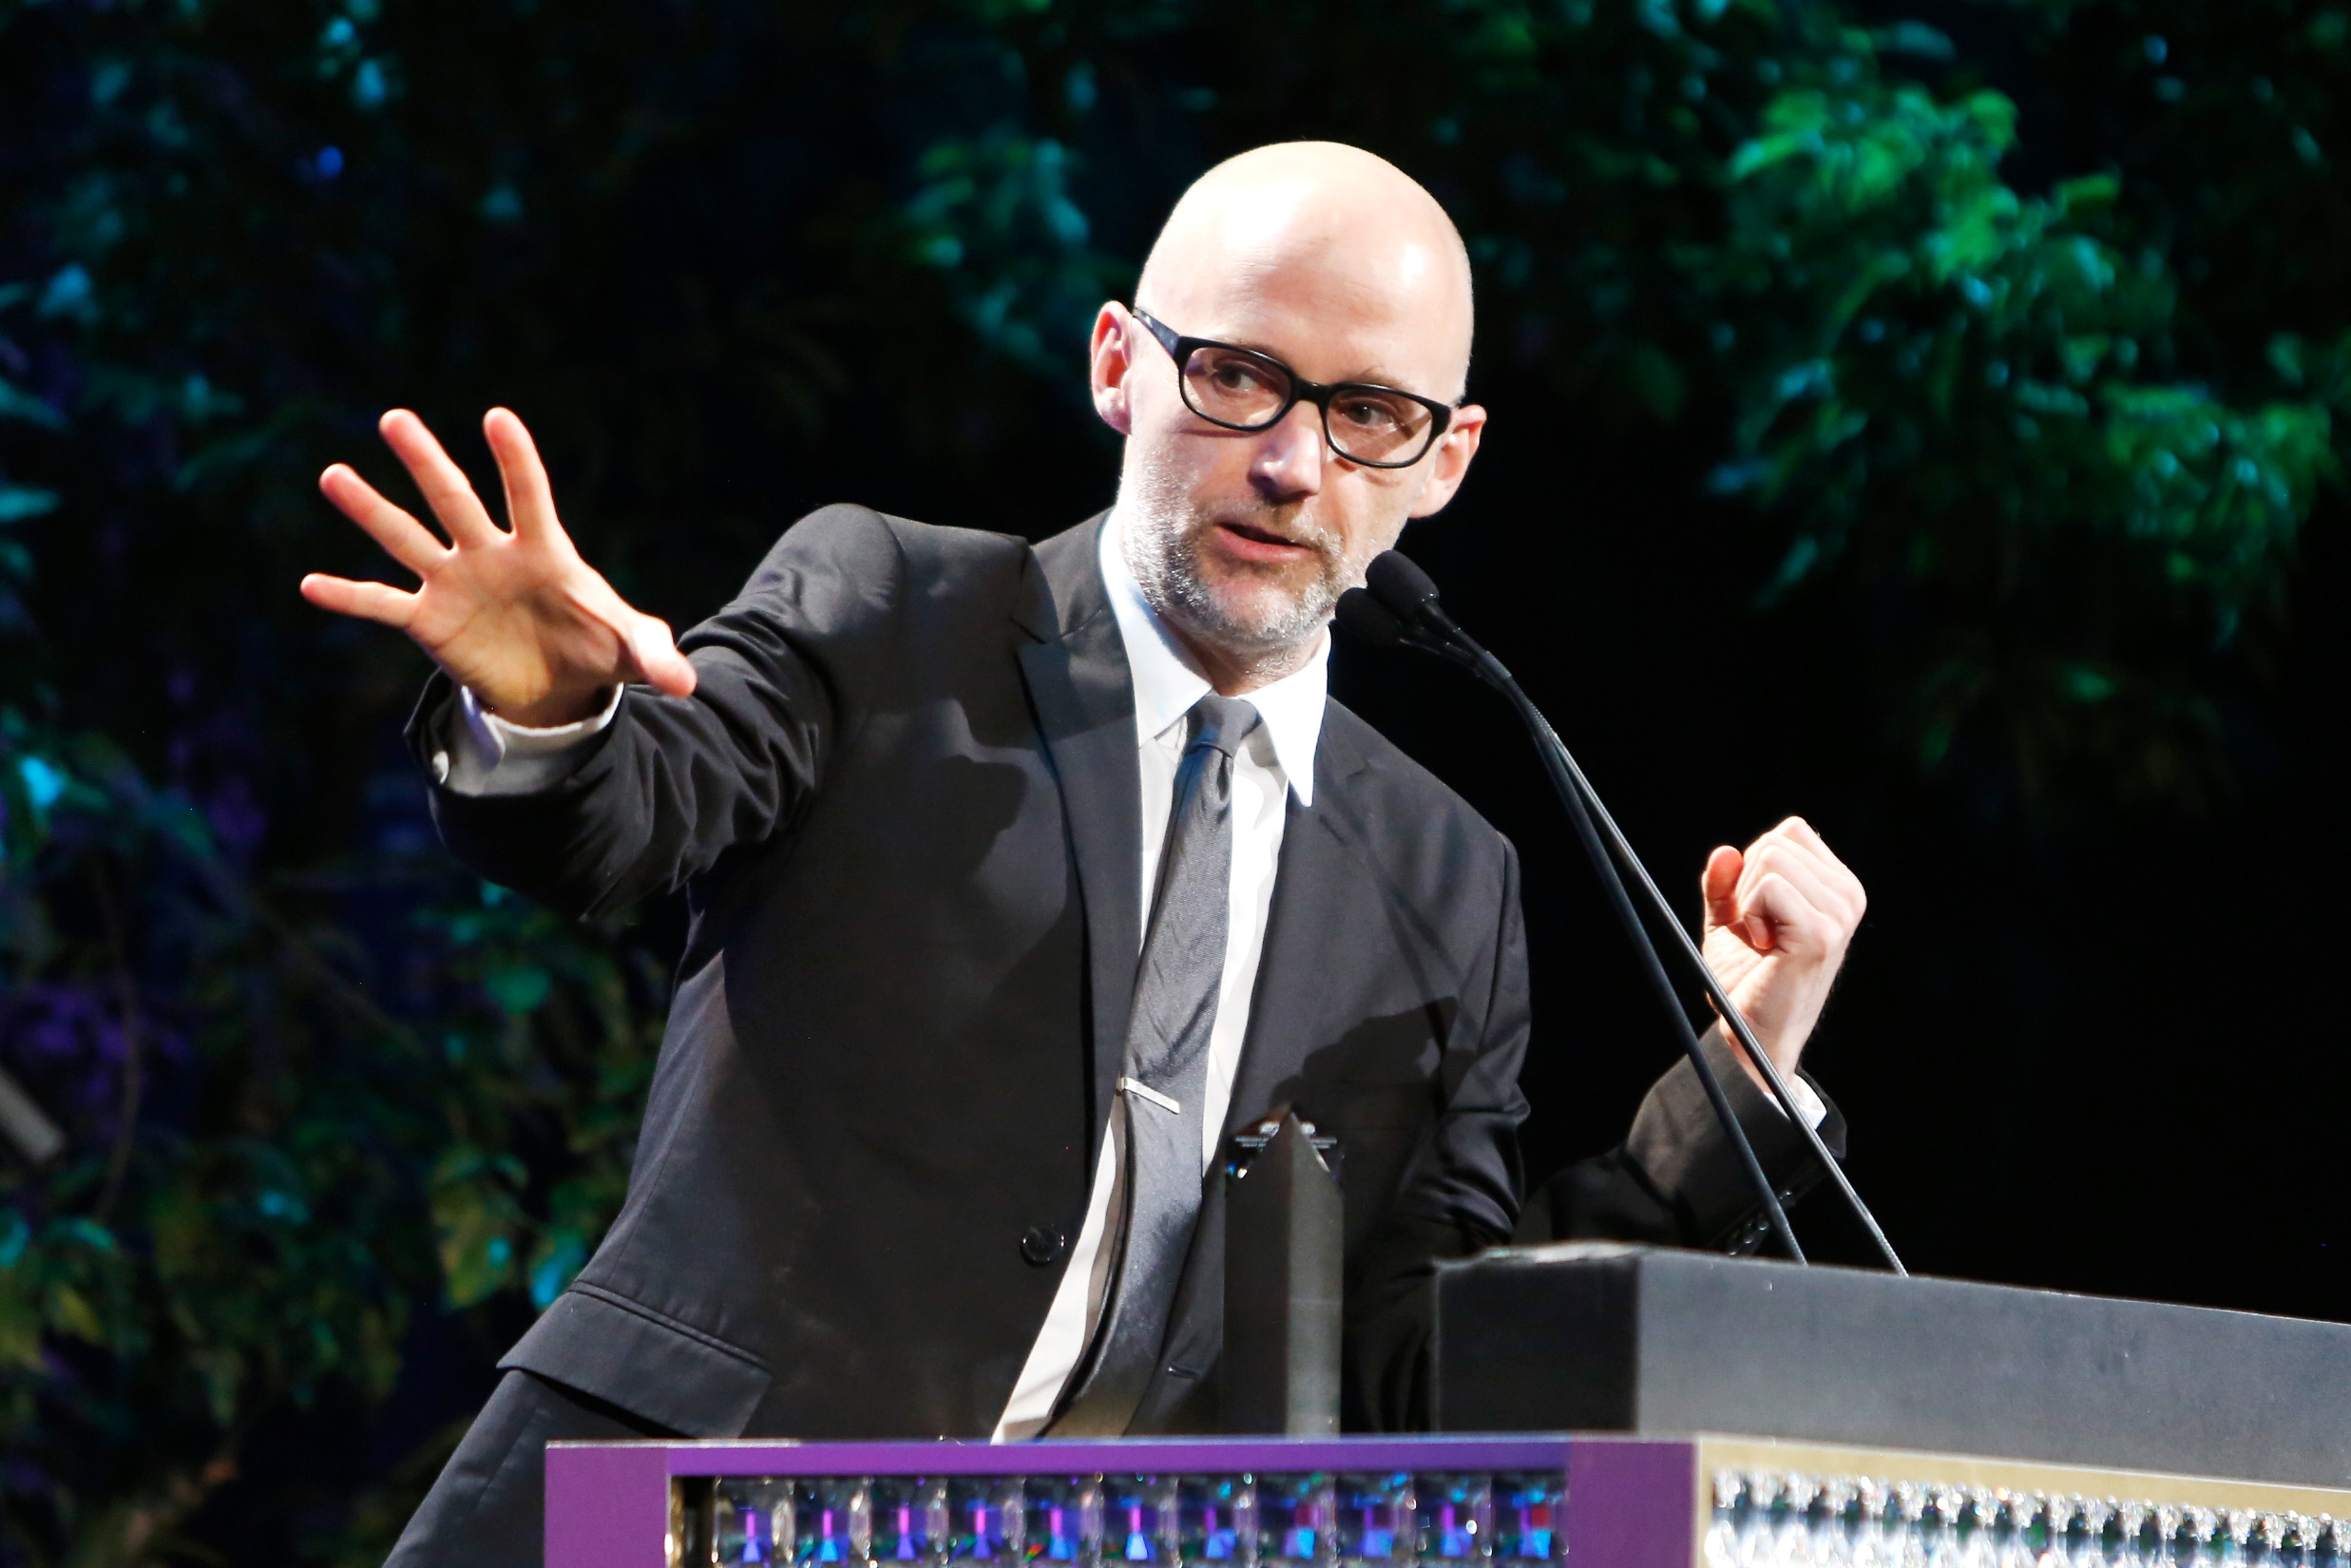 Moby speaking from a podium